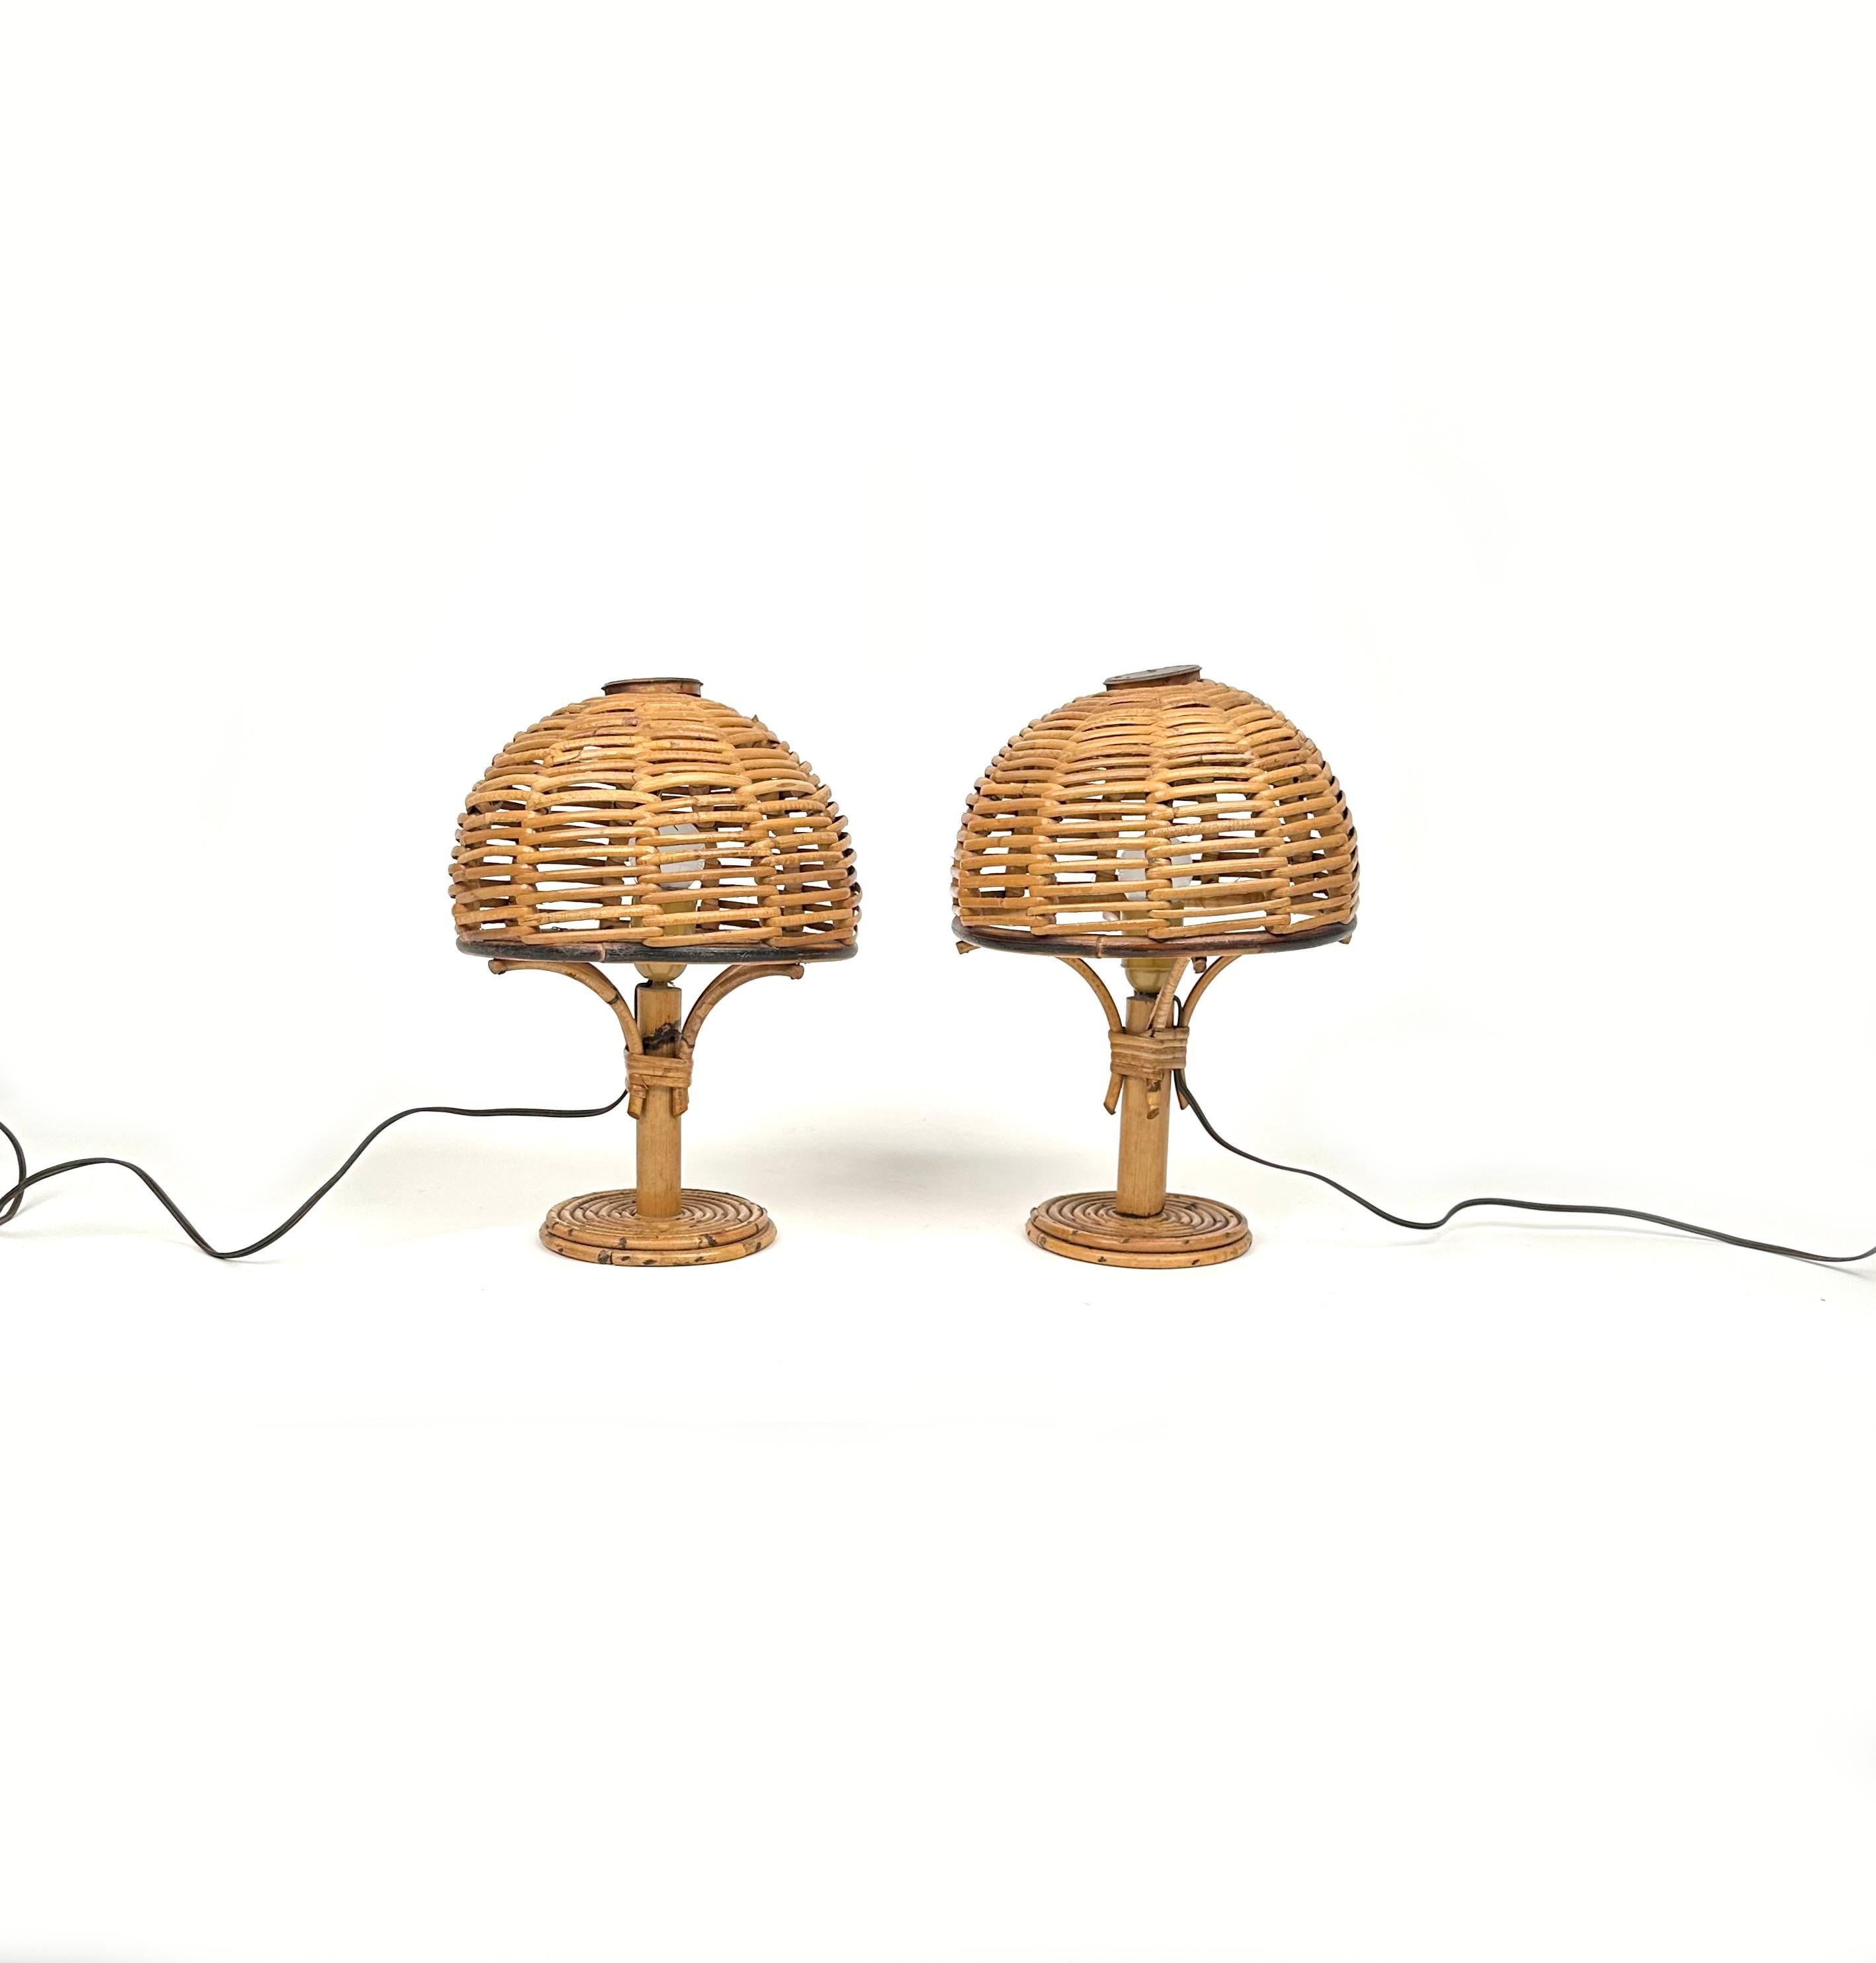 Beautifuls pair of table lamps in bamboo and rattan in the style of Louis Sognot.

Made in Italy in the 1960s.

Louis Sognot was a French designer best known for his elegant furniture made from a combination of rattan and wood. Sognot was